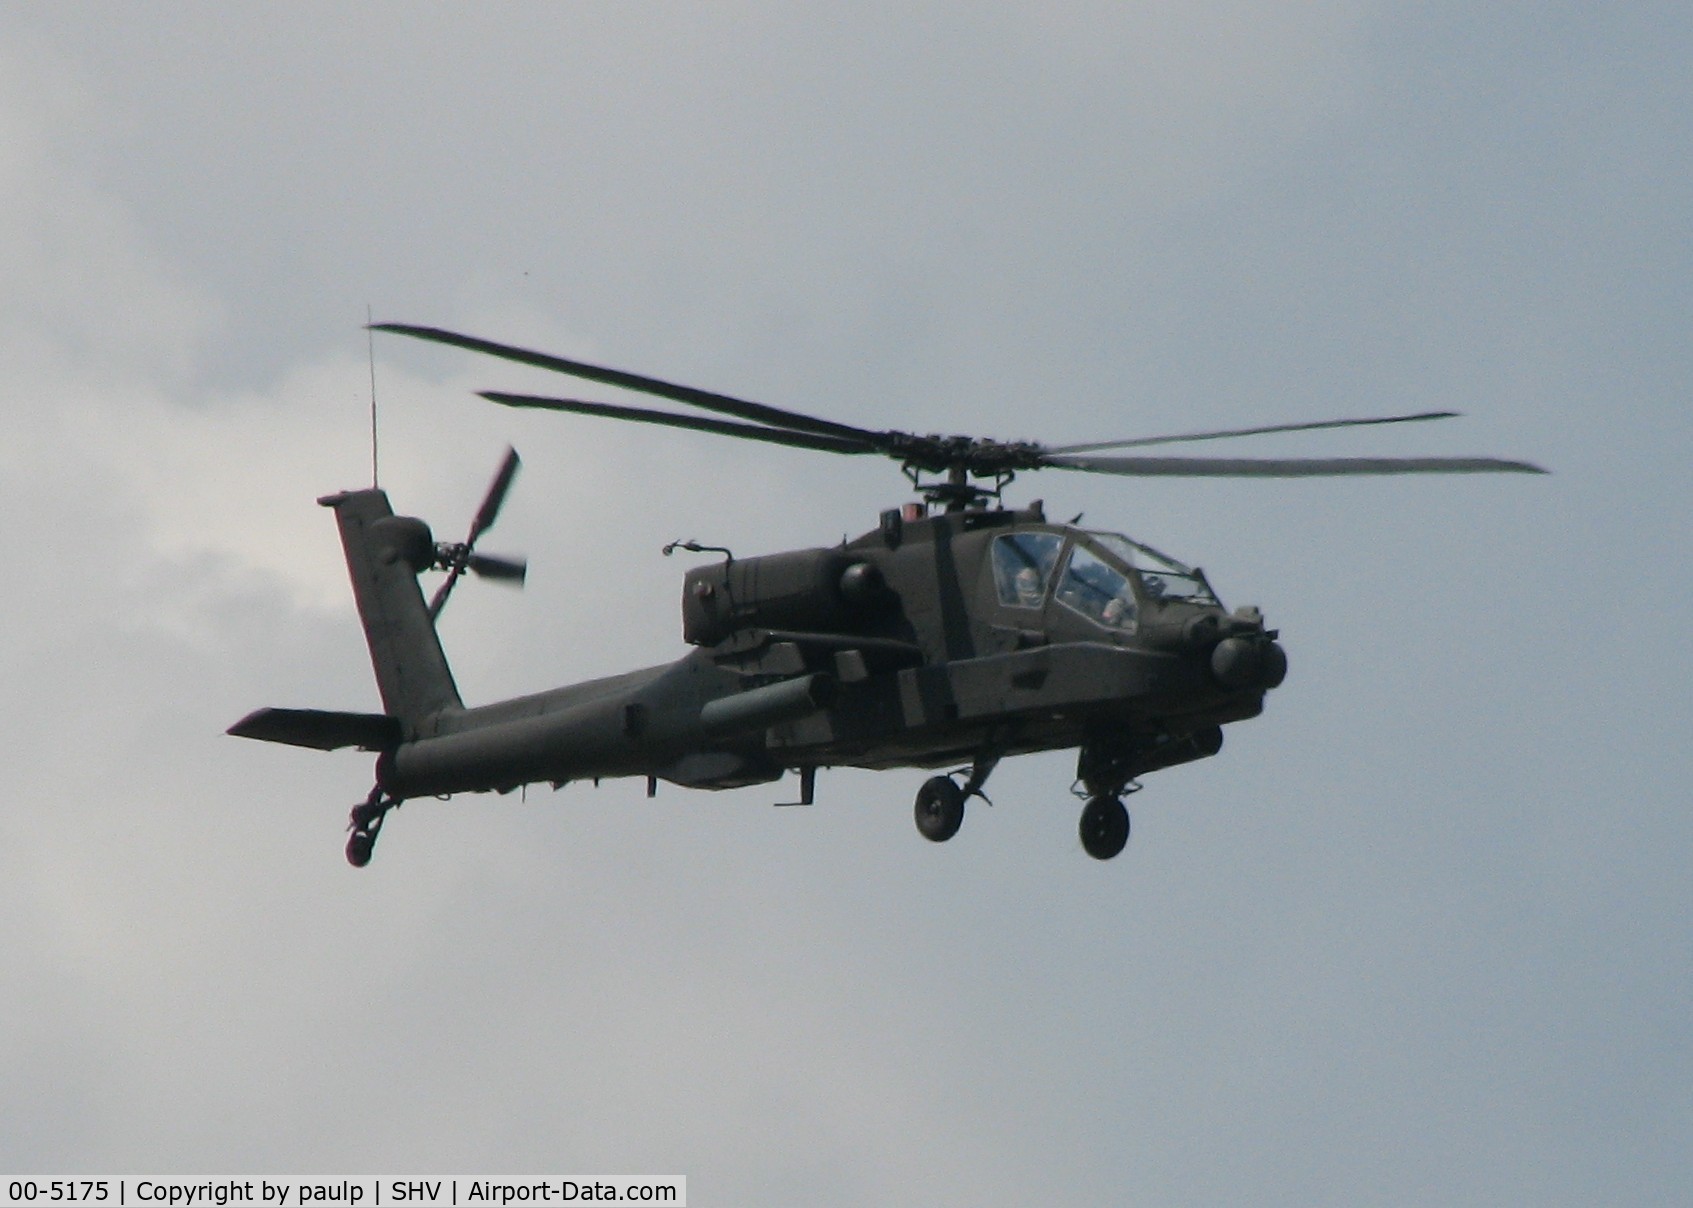 00-5175, Boeing AH-64D Longbow Apache C/N PVD175, Just lifted off from the Shreveport Regional airport.